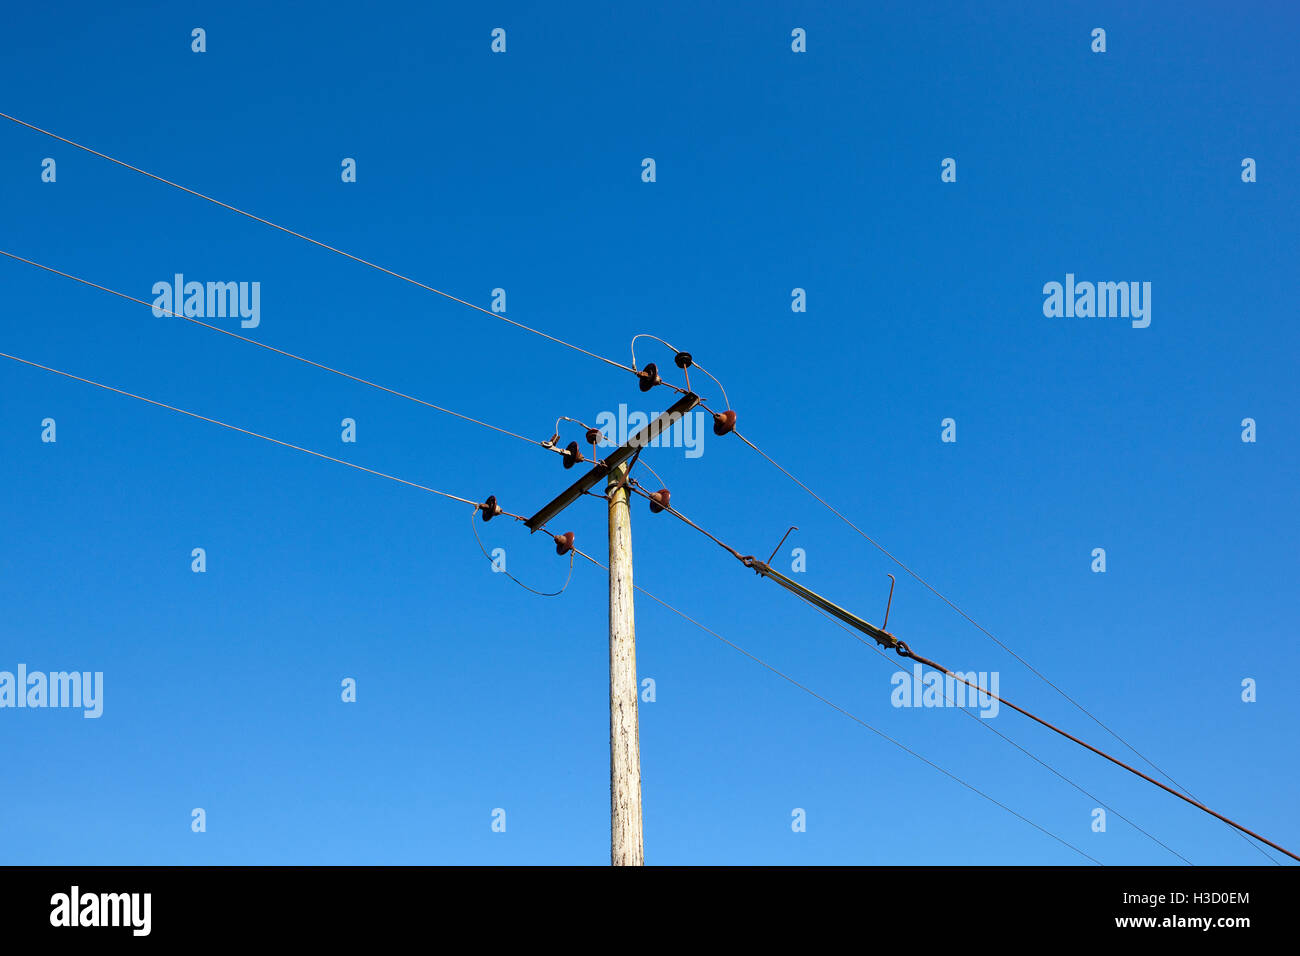 A wooden telegraph pole with wires on a clear blue sky background. Stock Photo